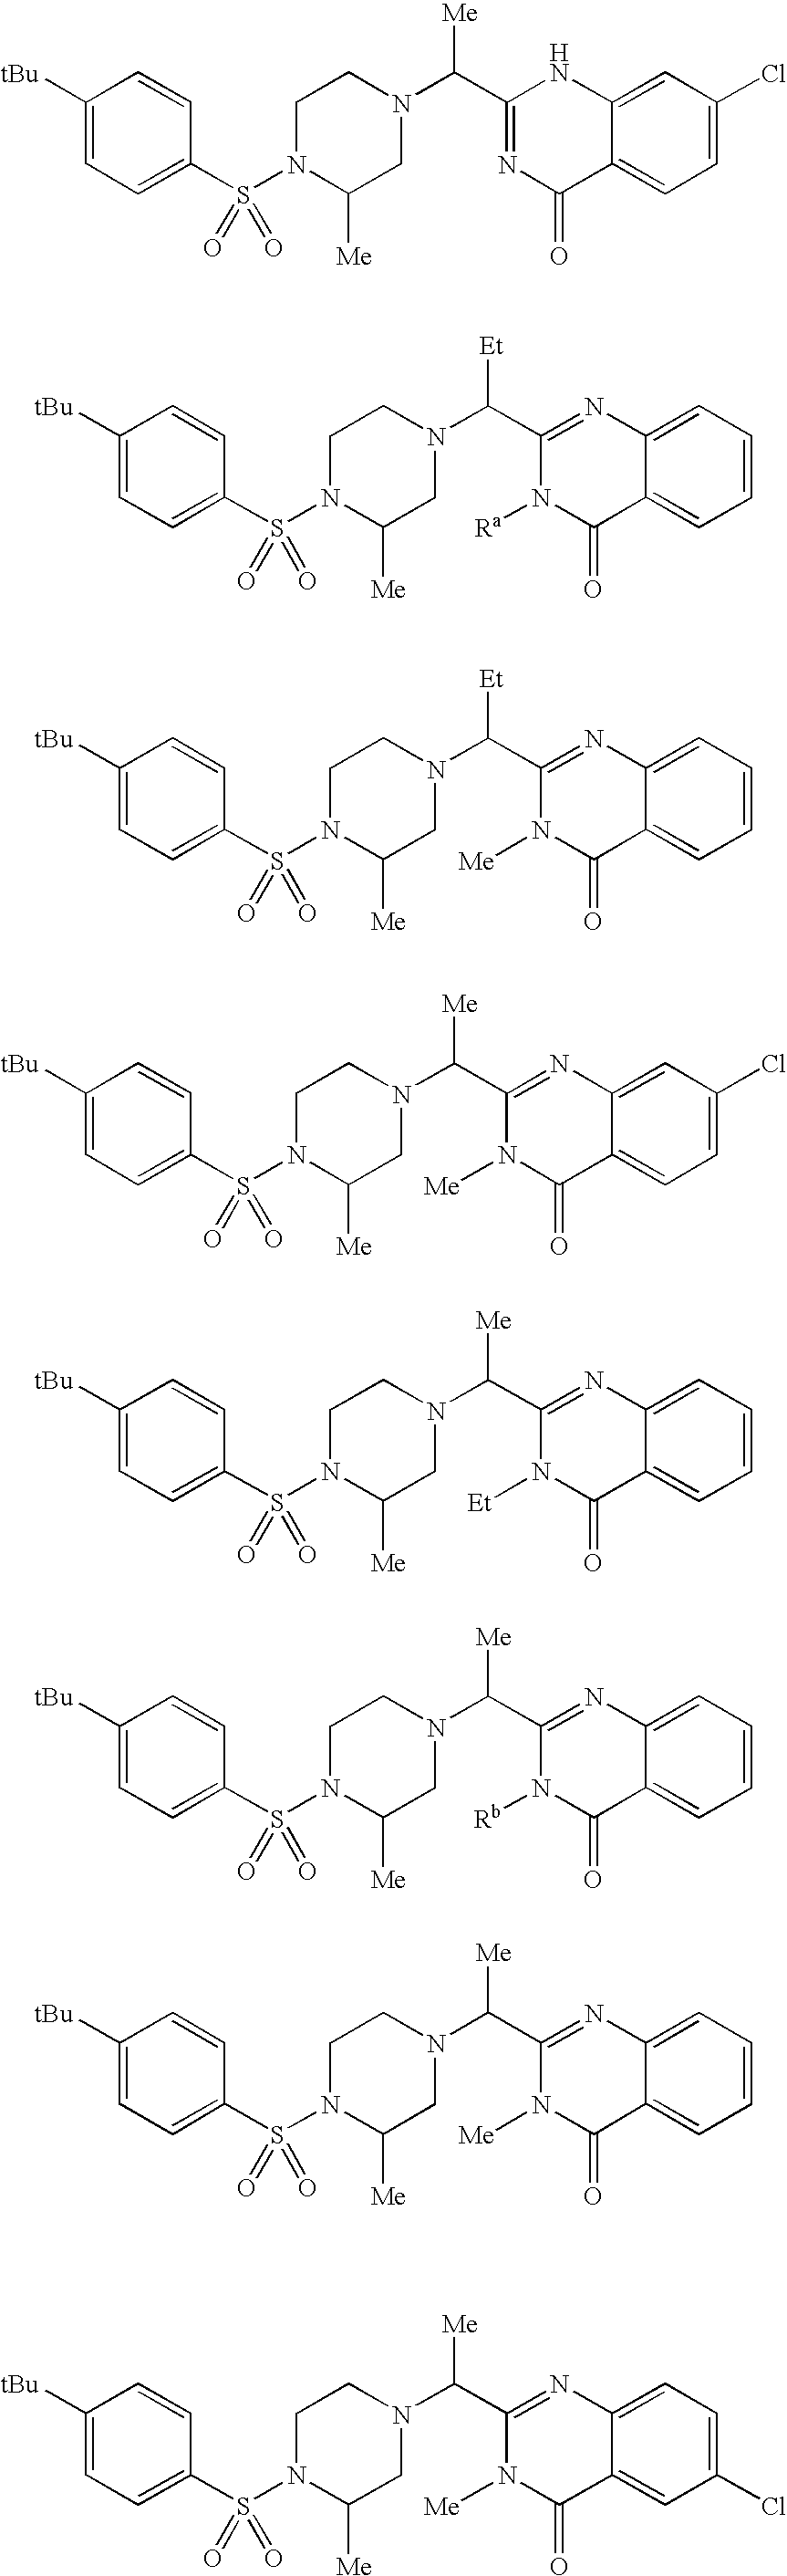 Aryl sulfonamide compounds and uses related thereto